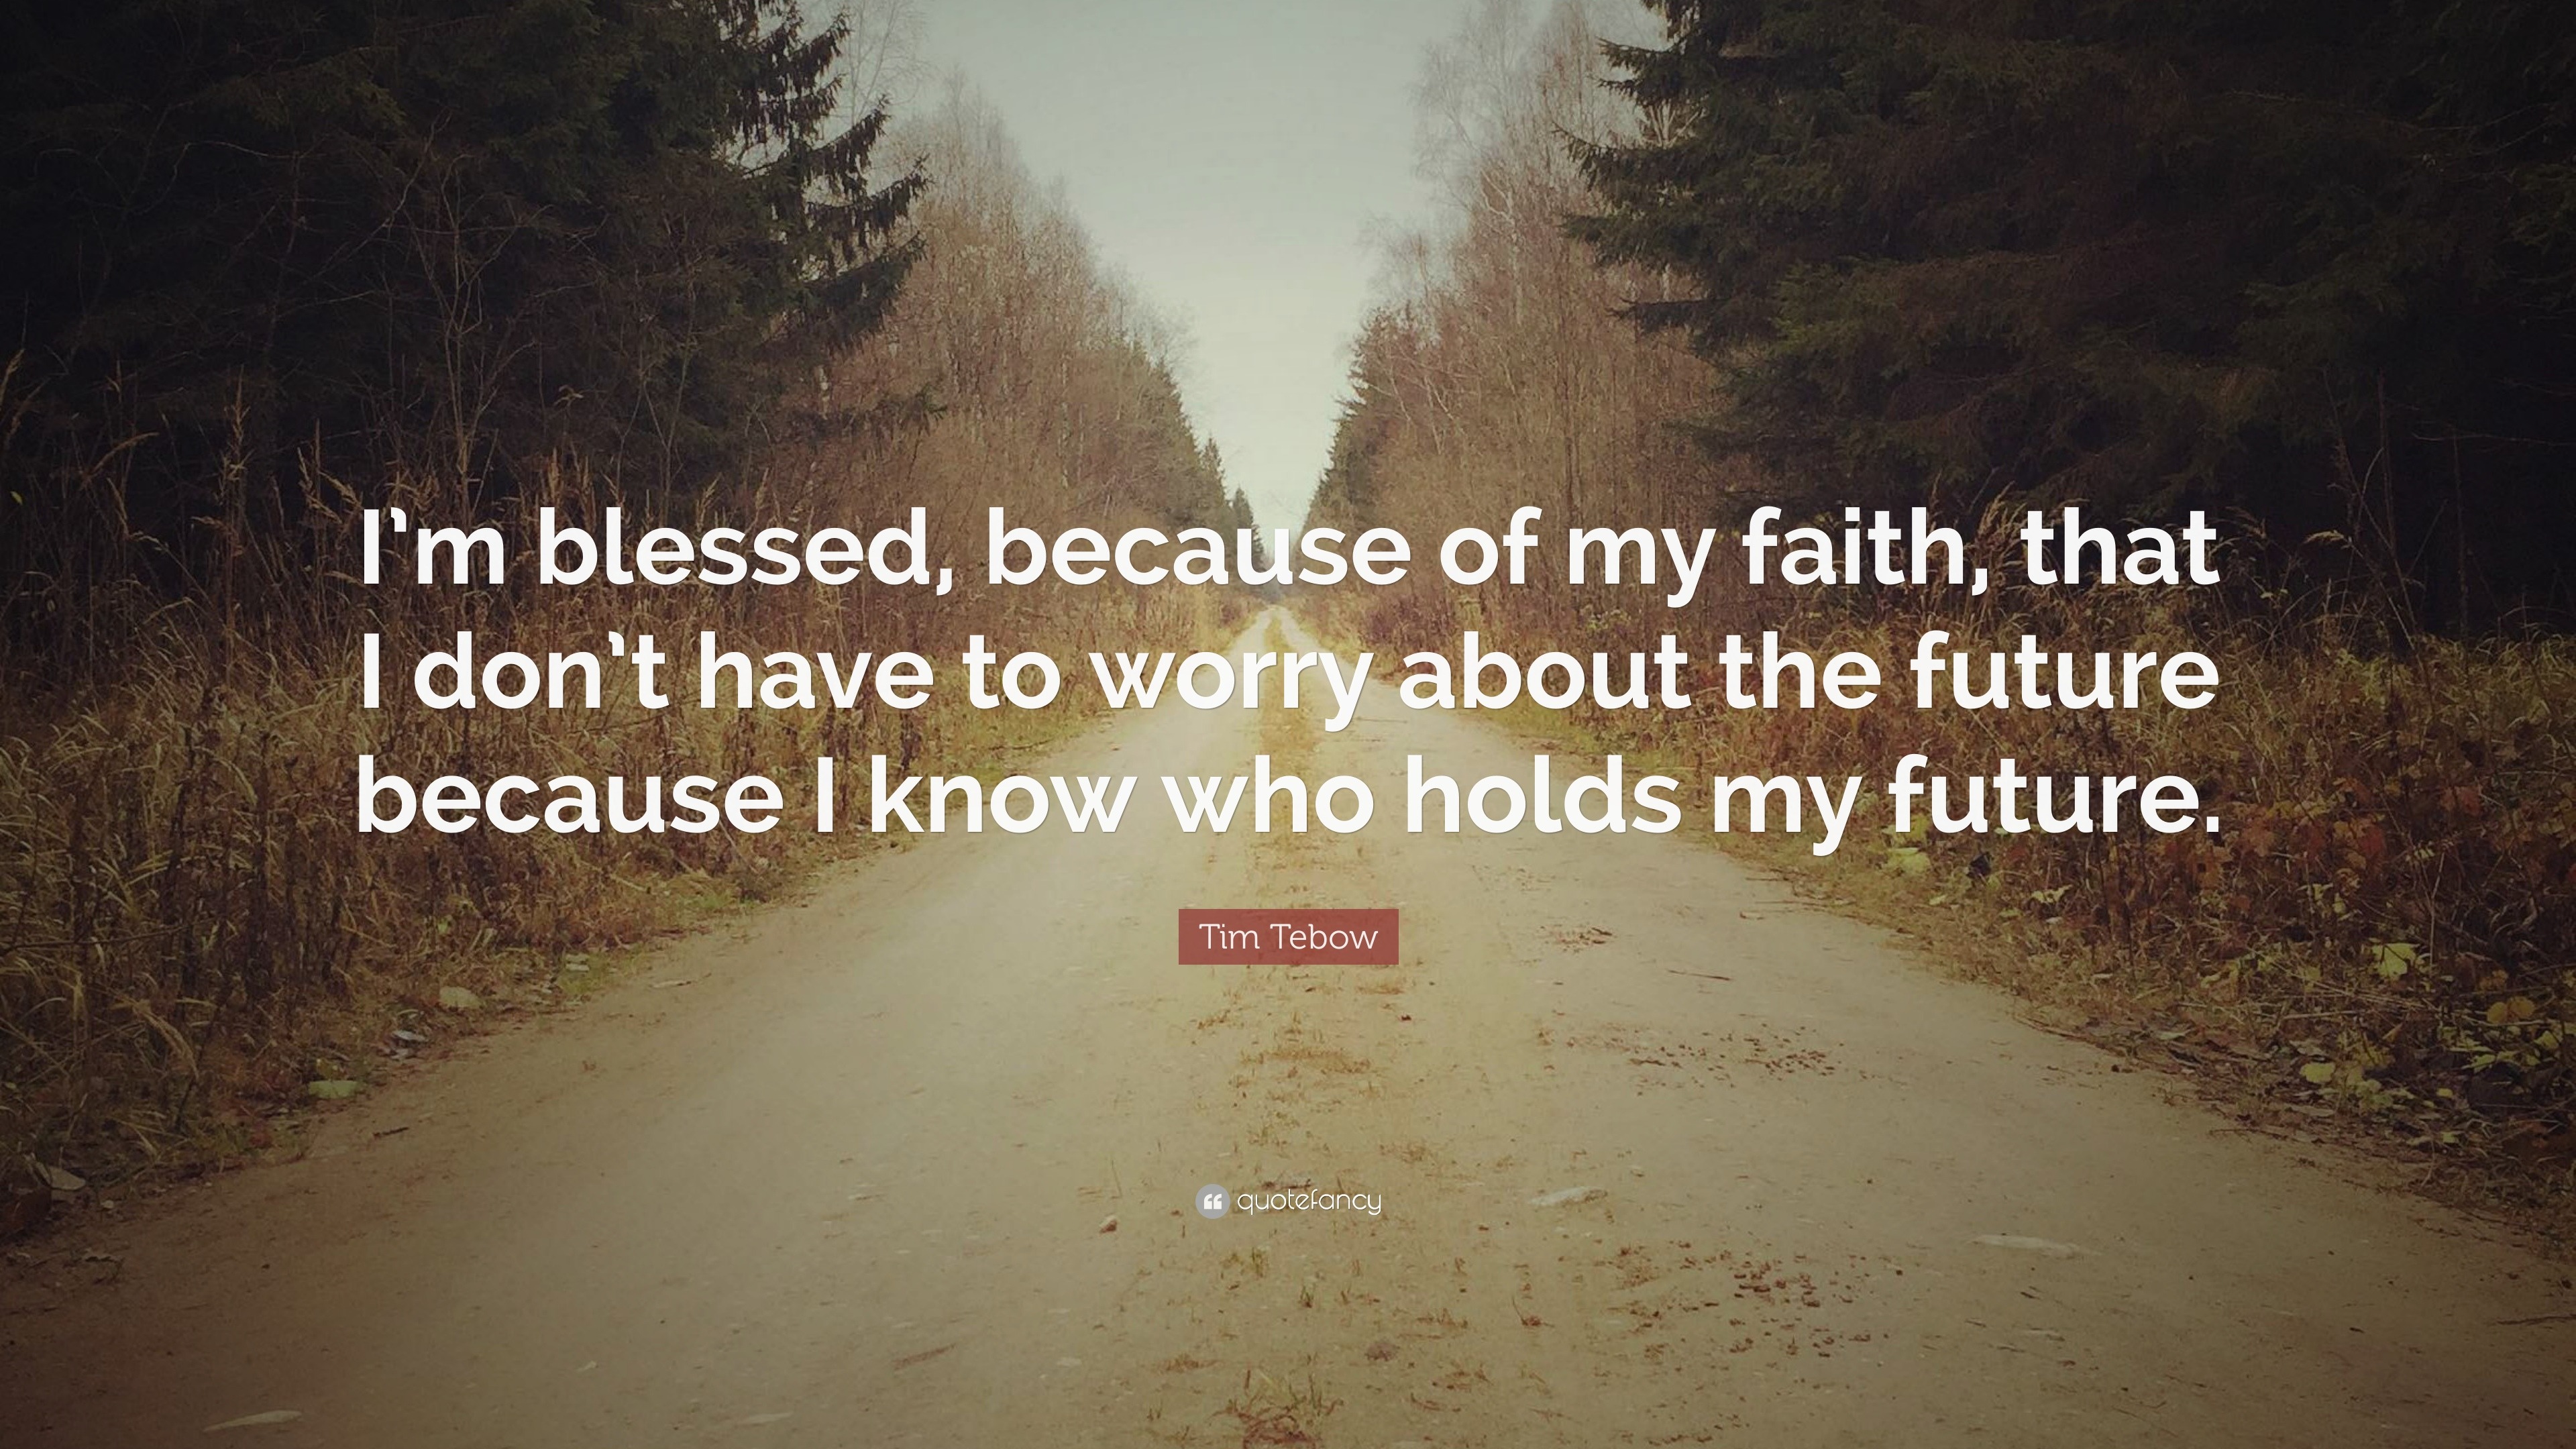 Tim Tebow Quote: “I’m blessed, because of my faith, that I don’t have ...